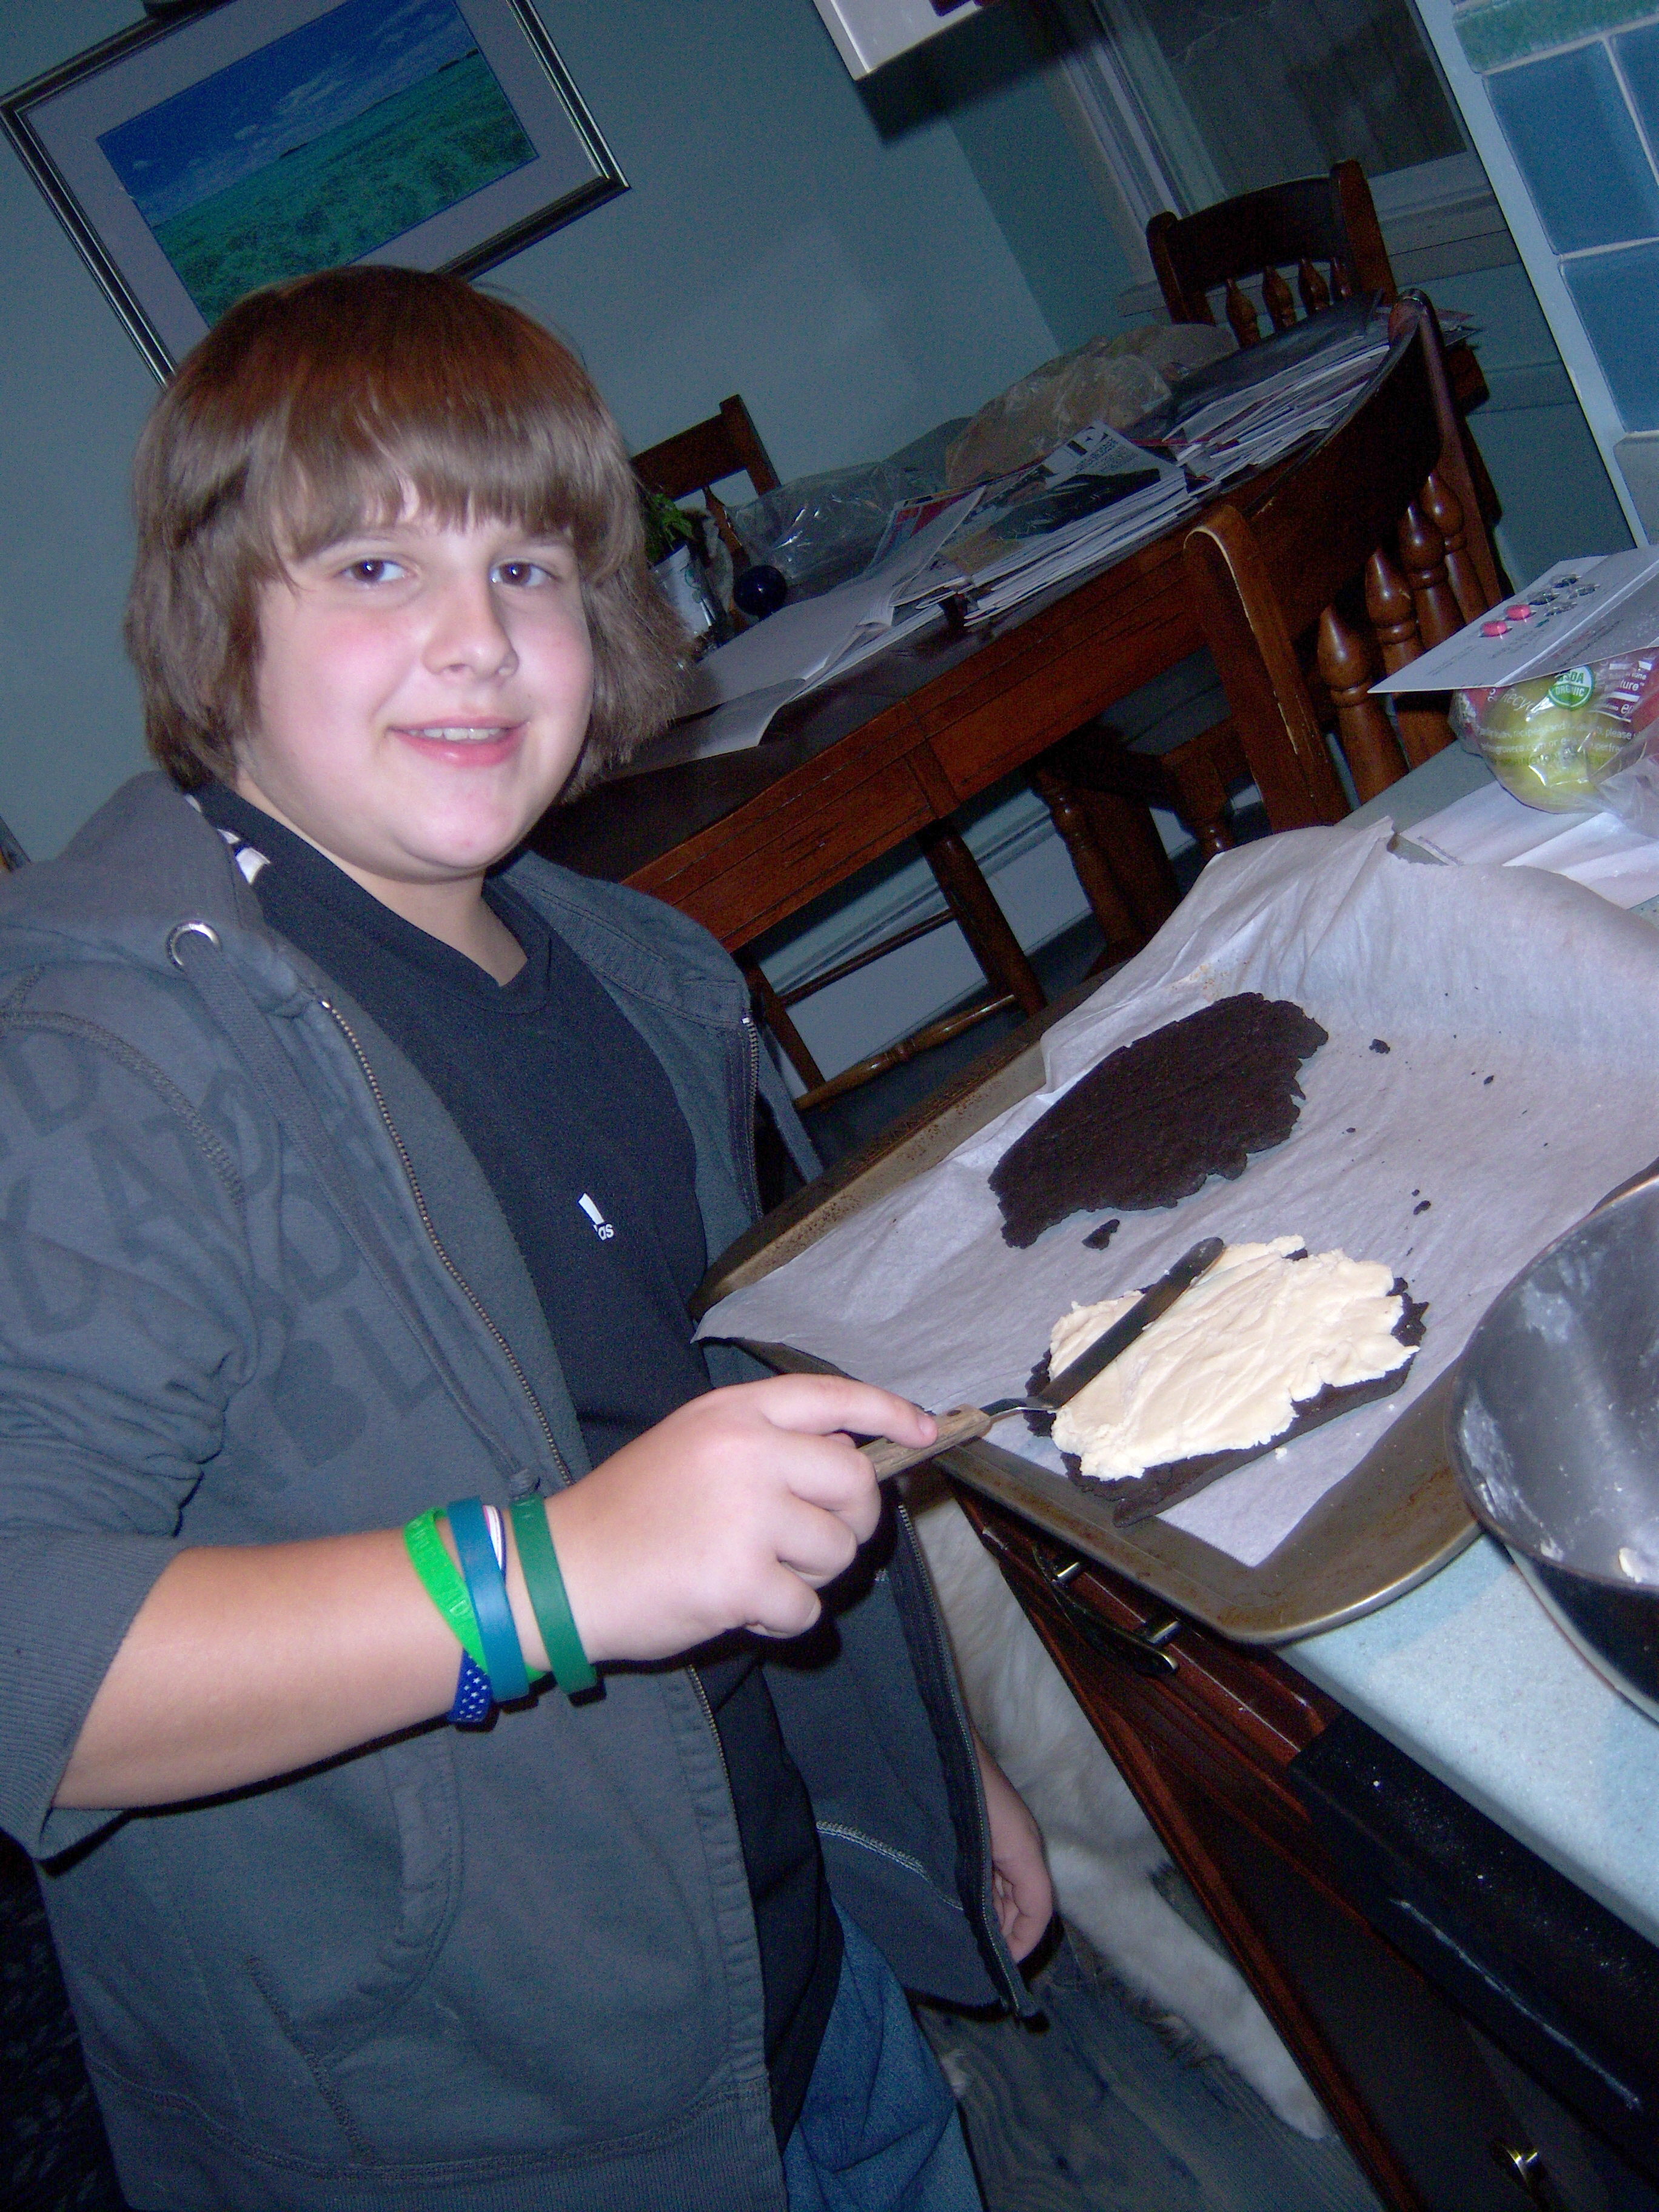 Giant Cookie in the Making